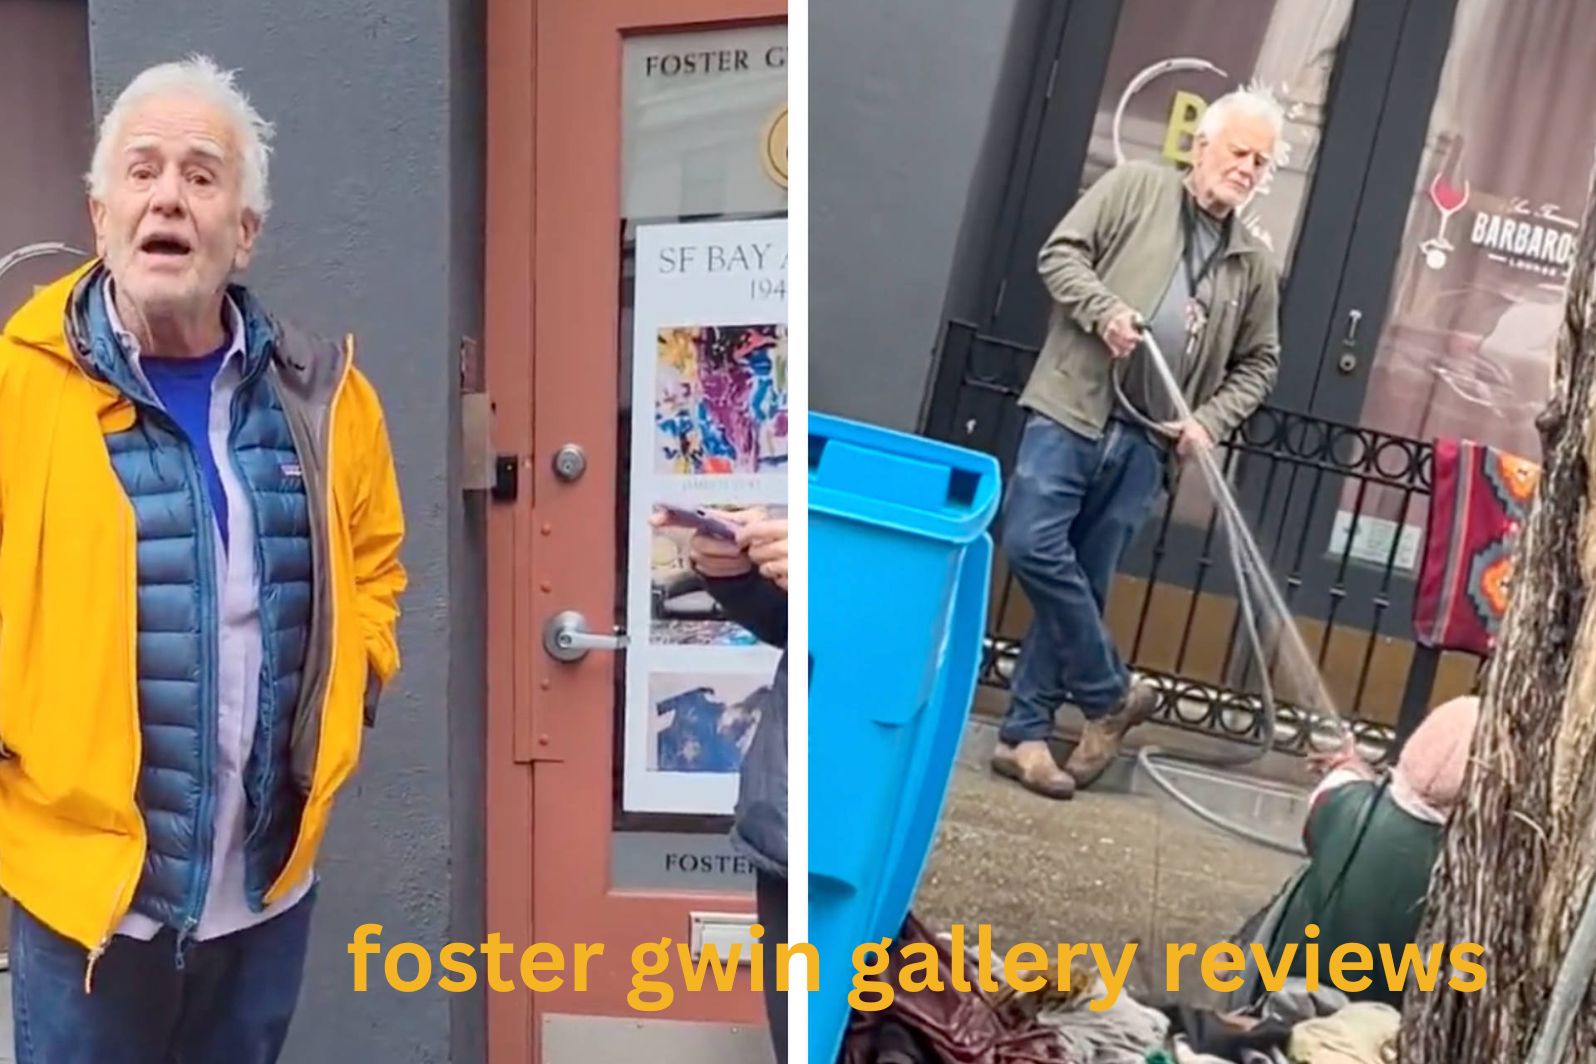 foster gwin gallery reviews